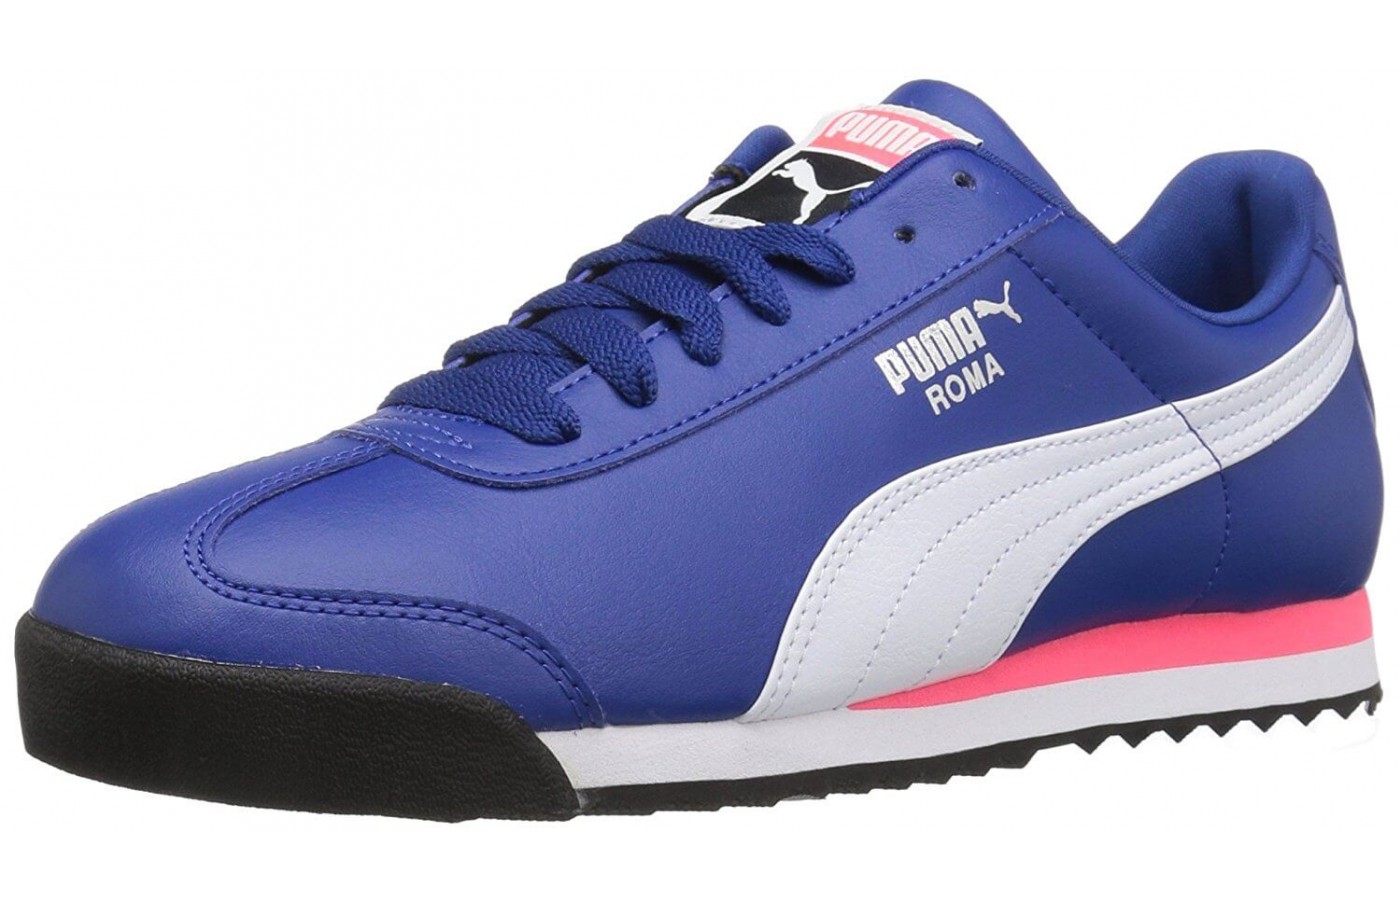 The Puma Roma features a faux-leather upper